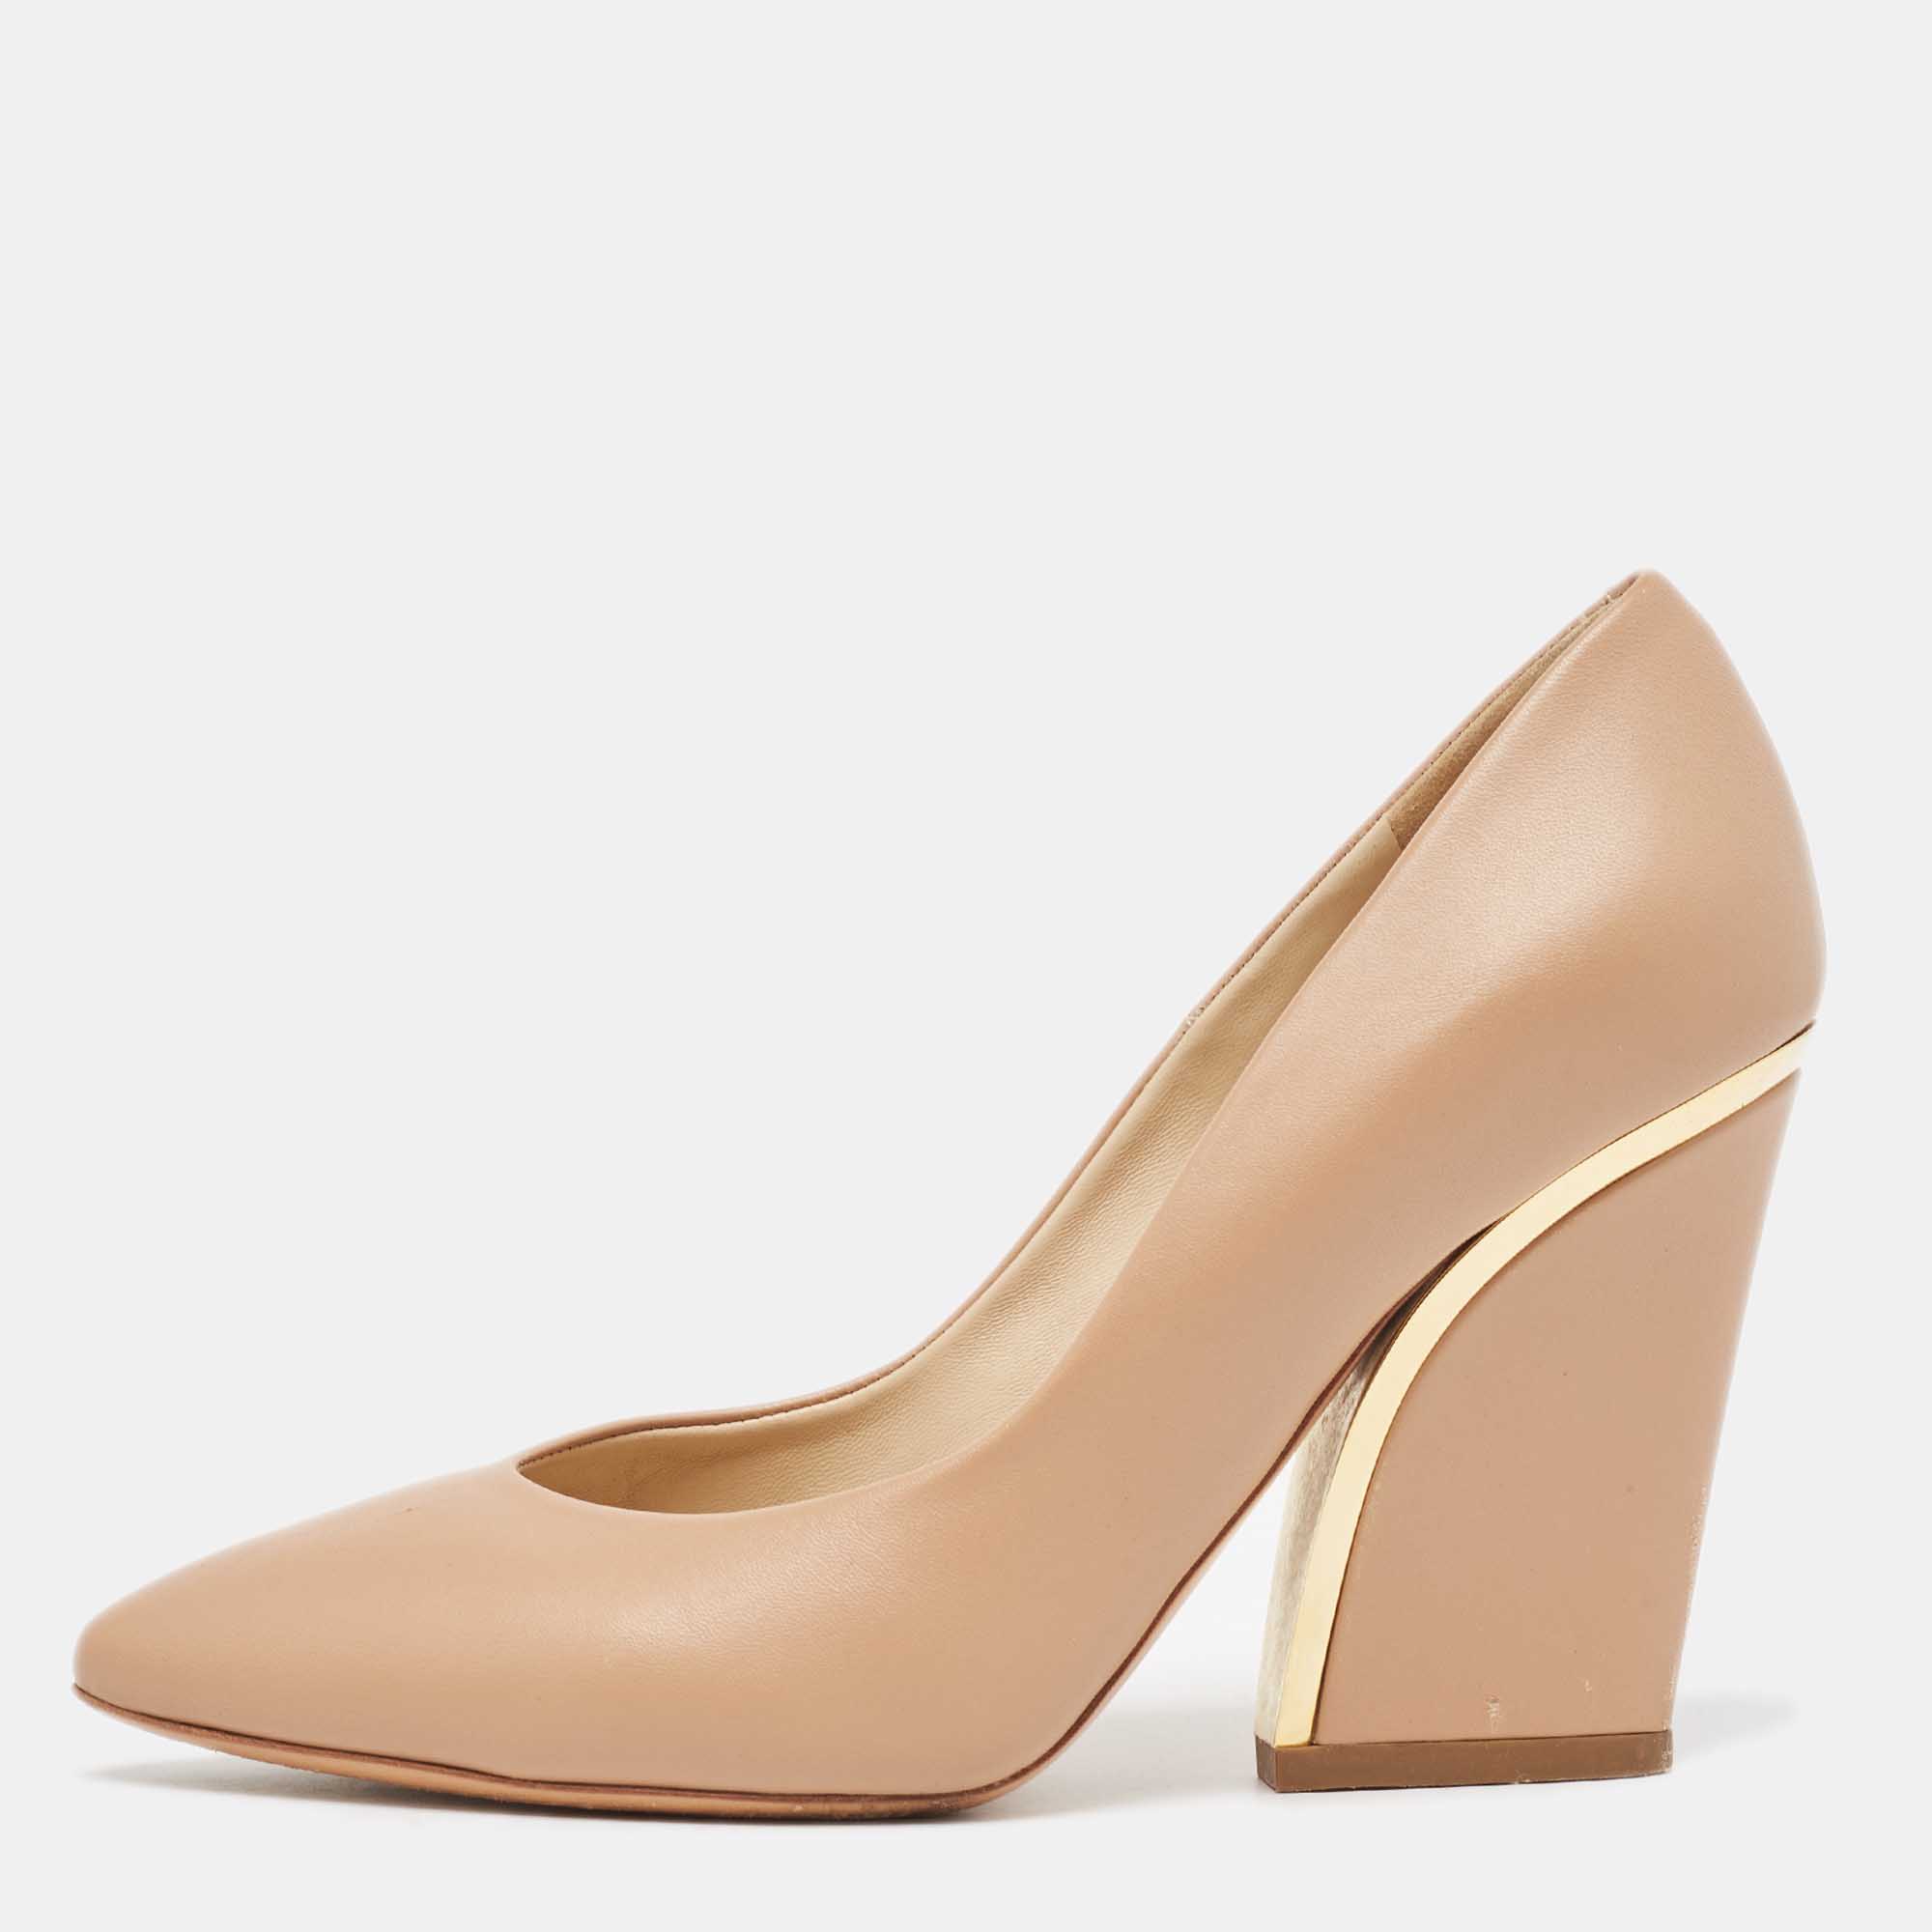 Chloe light brown leather beckie pumps size 37.5